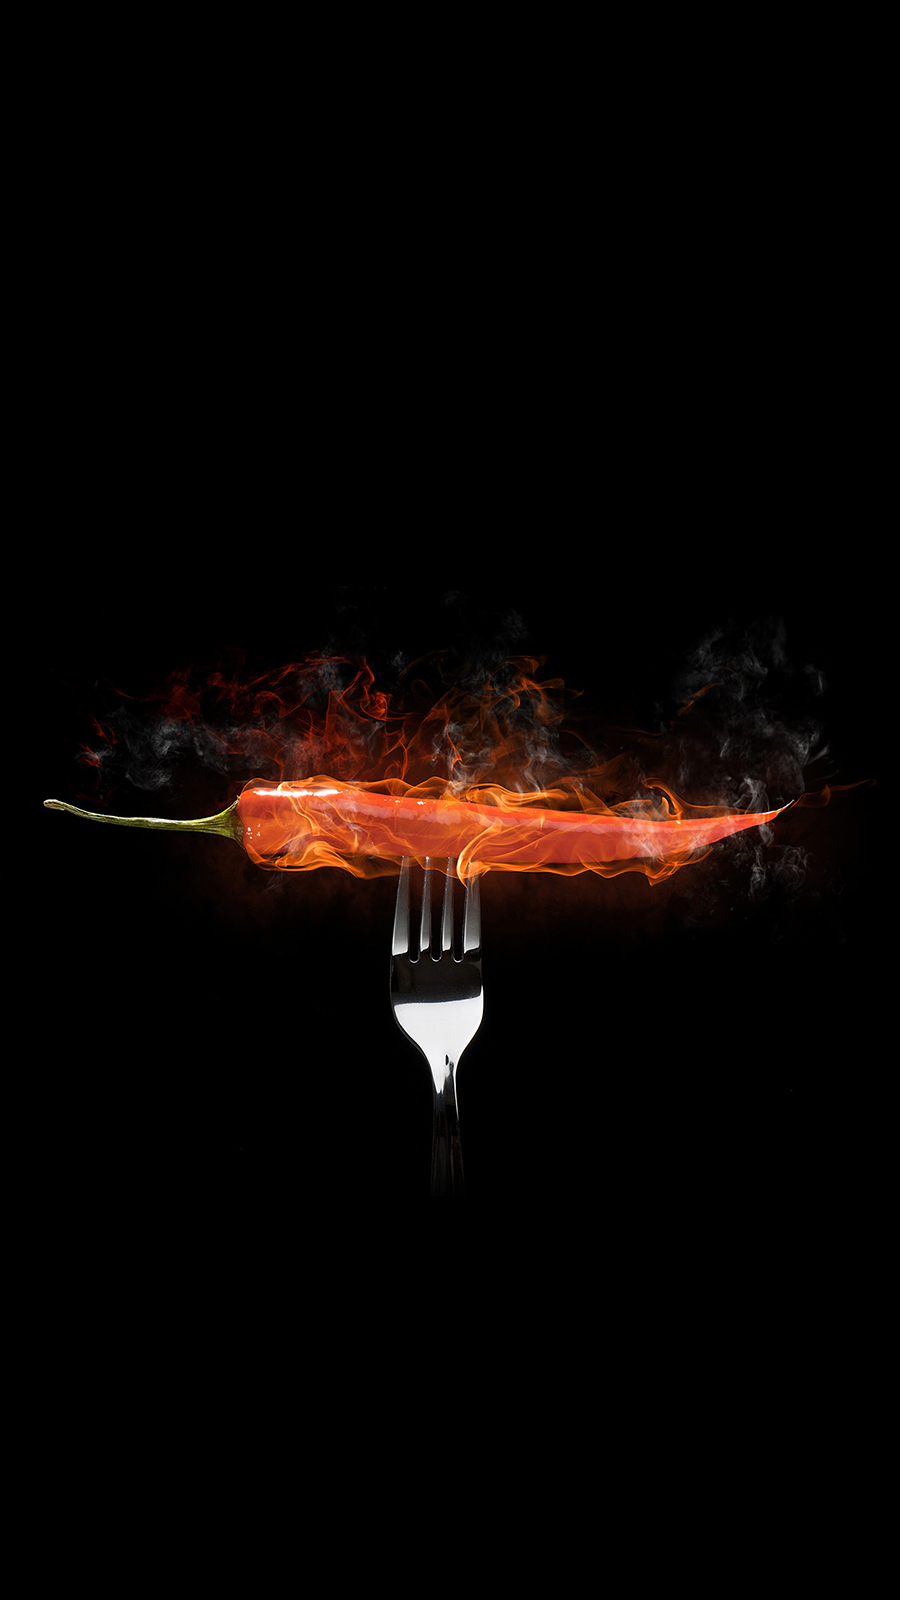 Red Hot Ghost Chili Pepper Flames Fork Illustration Android Wallpaper